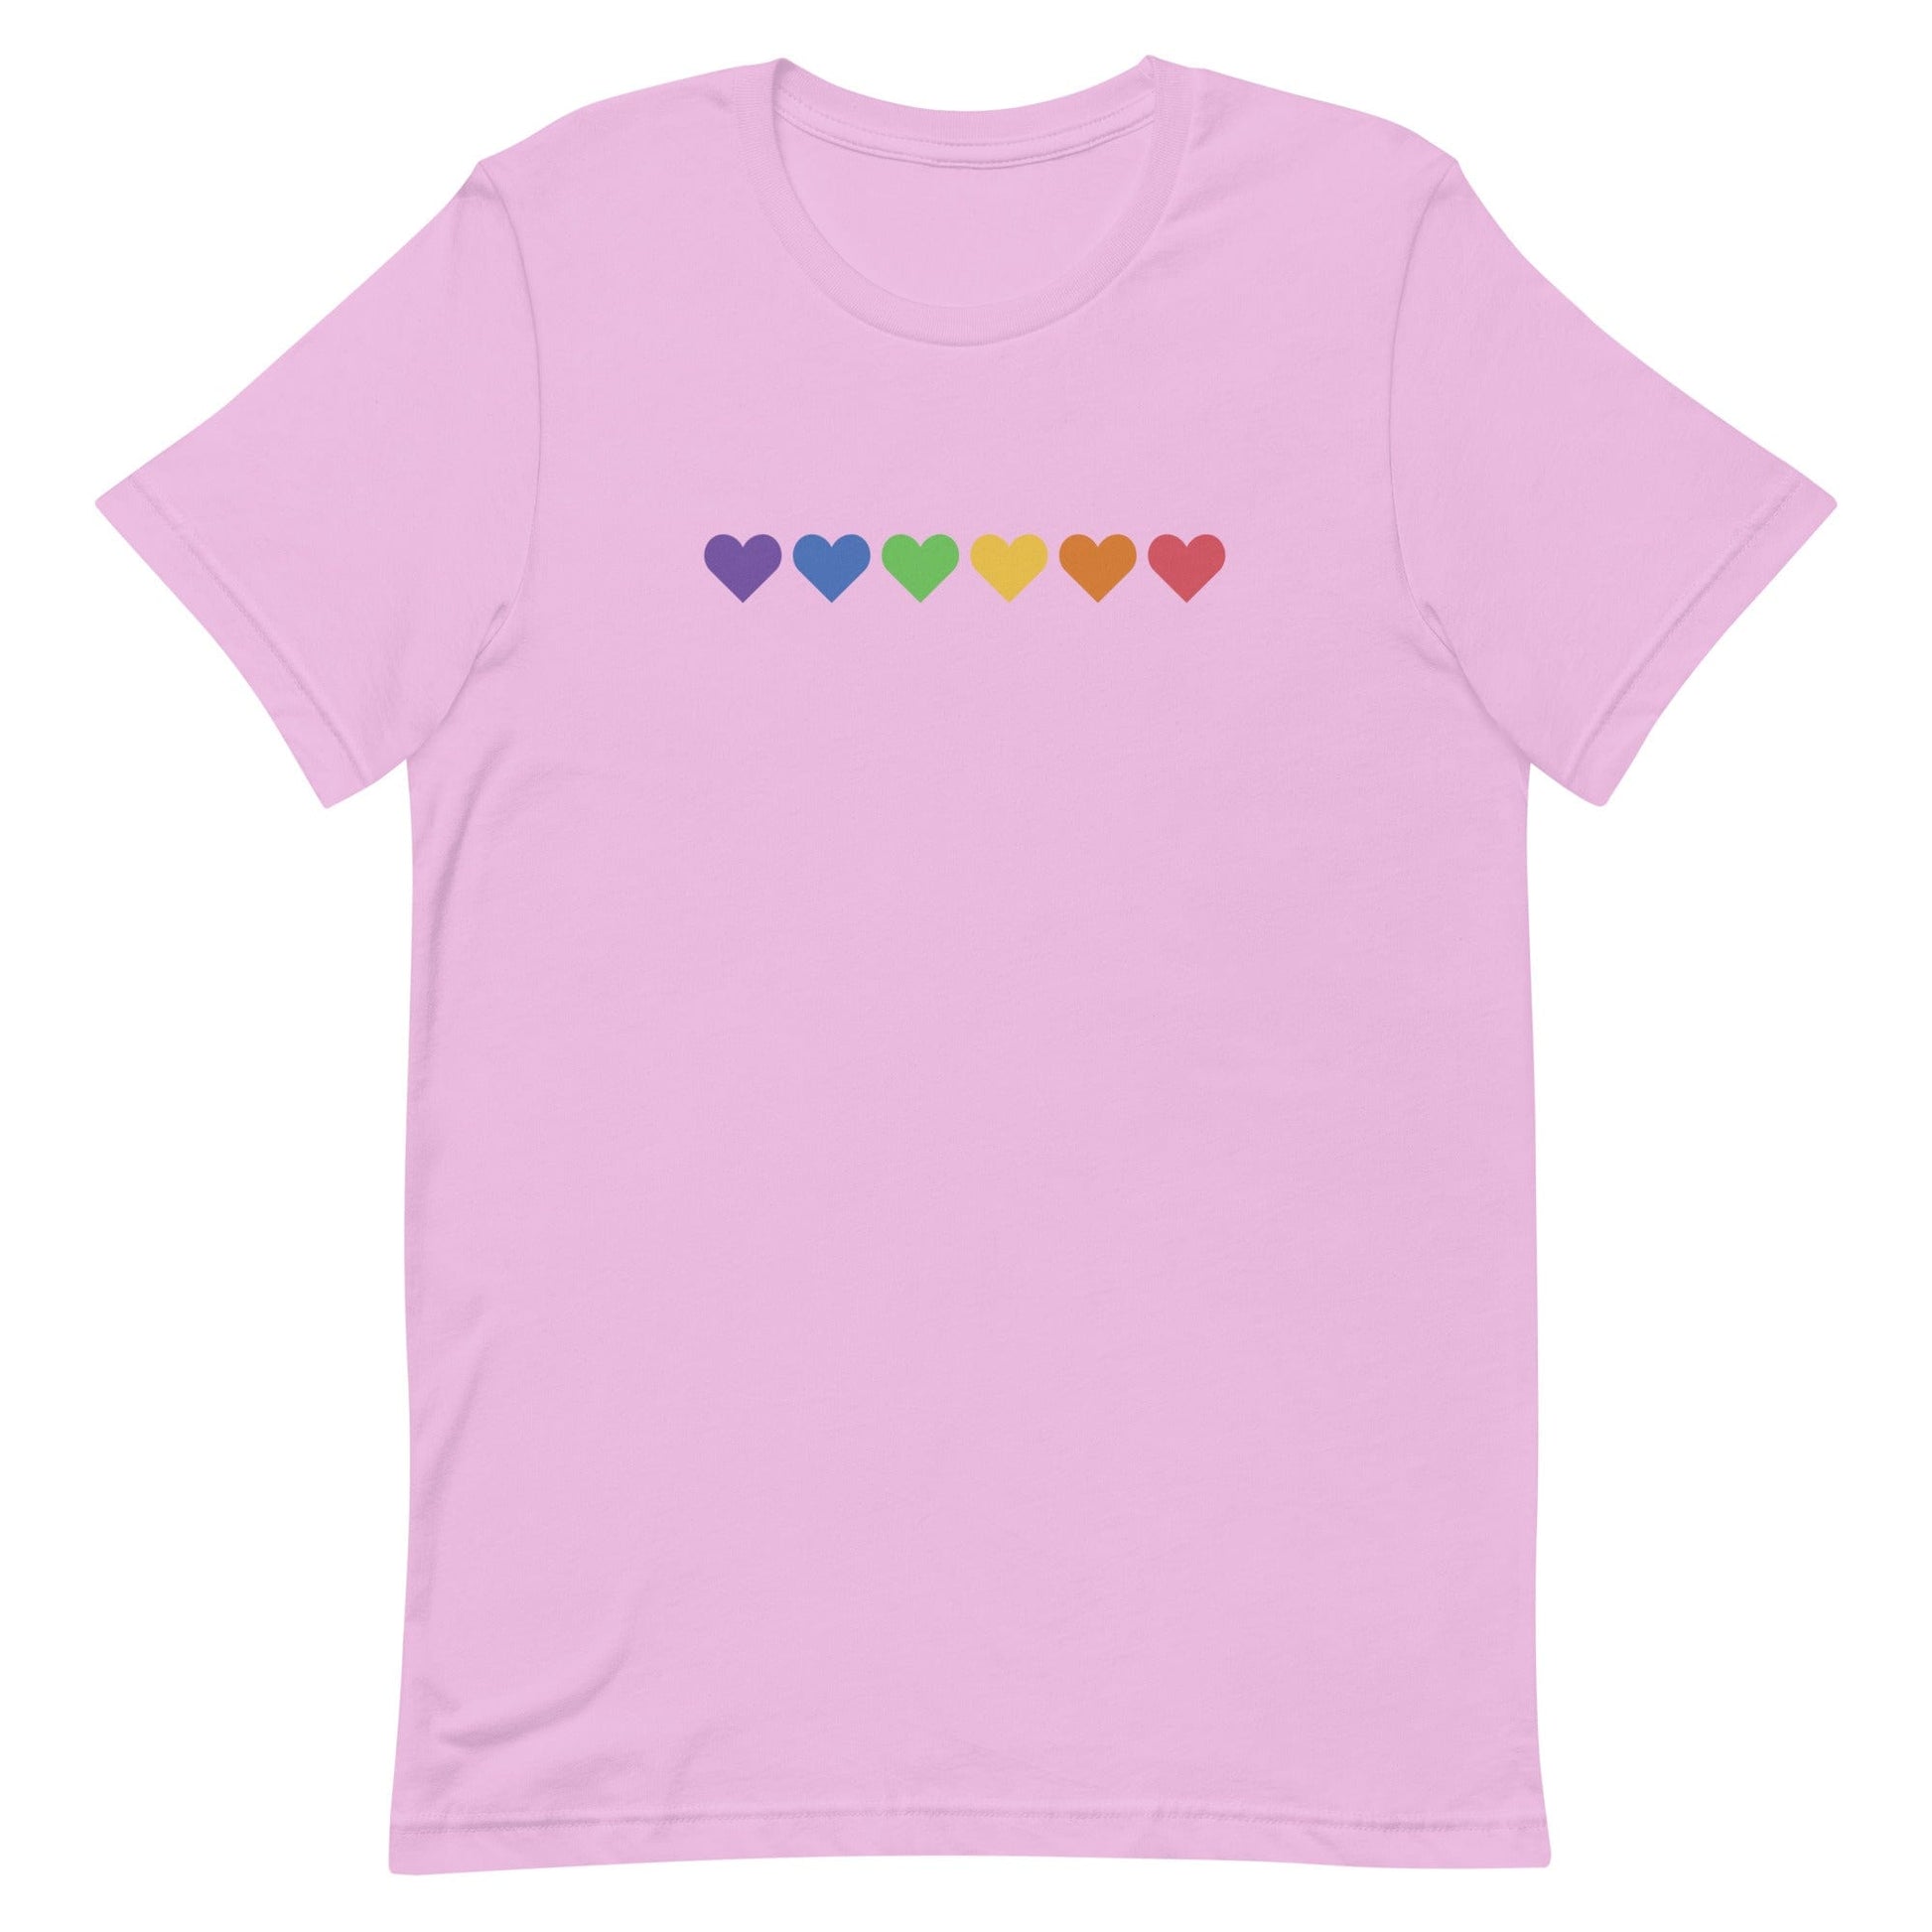 front-lilac-genderless-hearts-pride-t-shirt-by-feminist-define